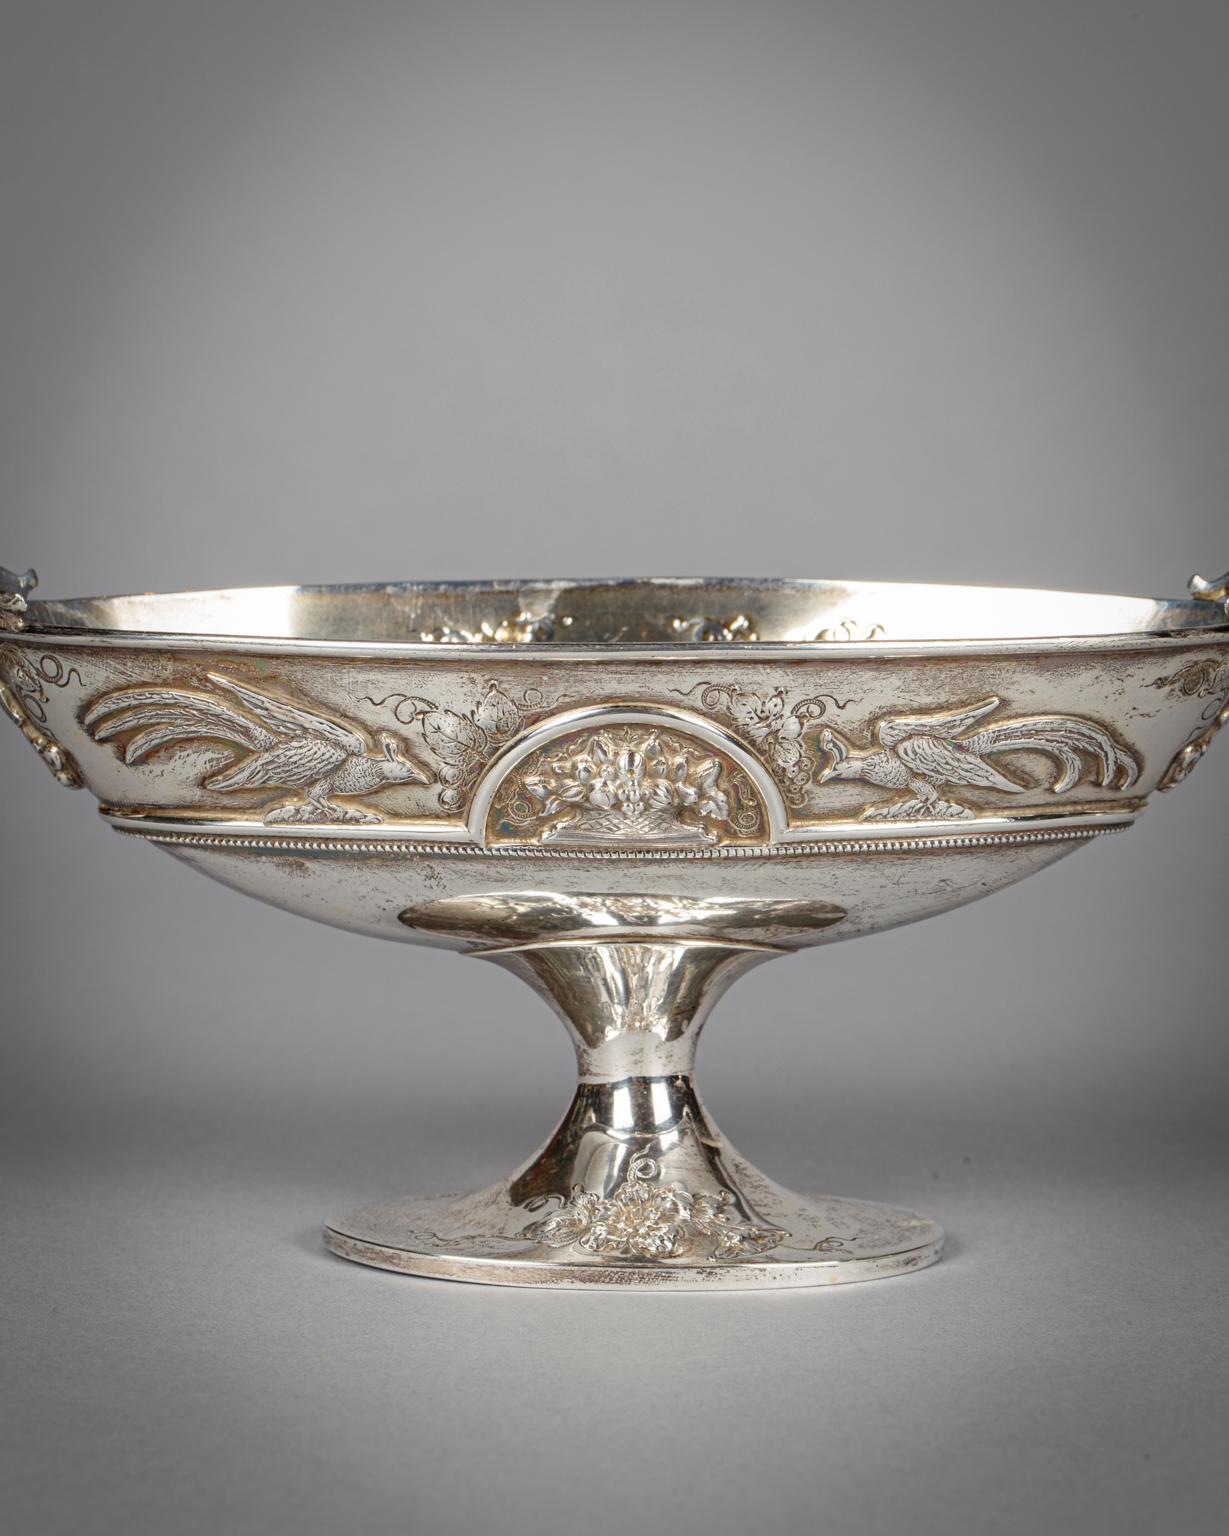 Marked Barbour Silver Co. in Hartford CT. Chased with birds flanking an arched containing flowers and fruit in a basket, with laurel and berry ringed handles.